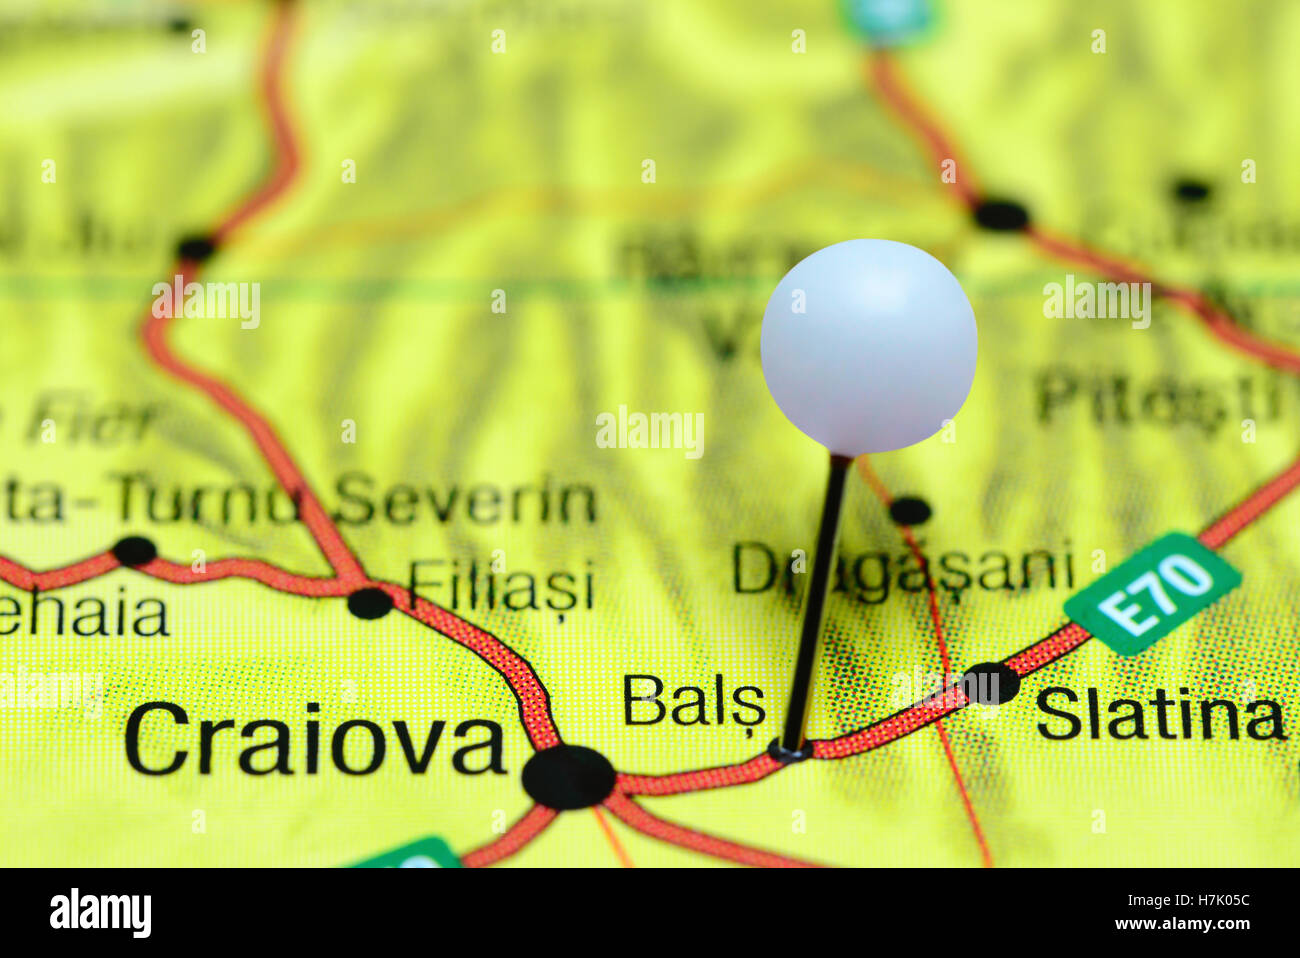 Bals pinned on a map of Romania Stock Photo